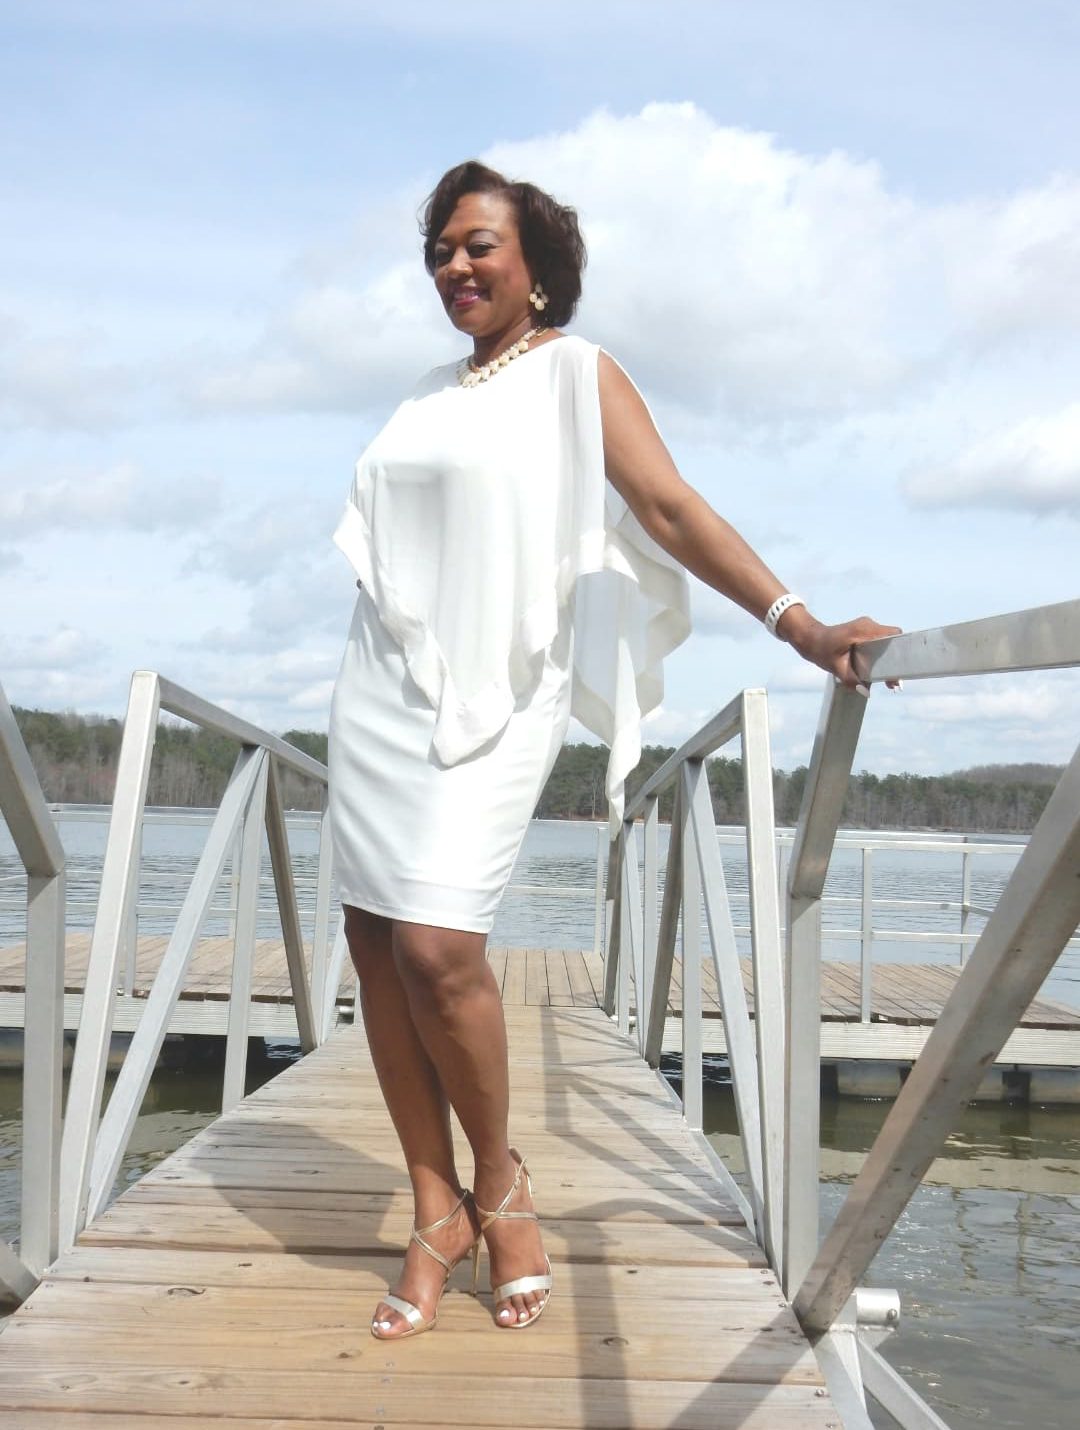 Side view of a Midnight Velvet customer on a pier, in a white dress with satin trim on the cape-like top, and silver sandals.